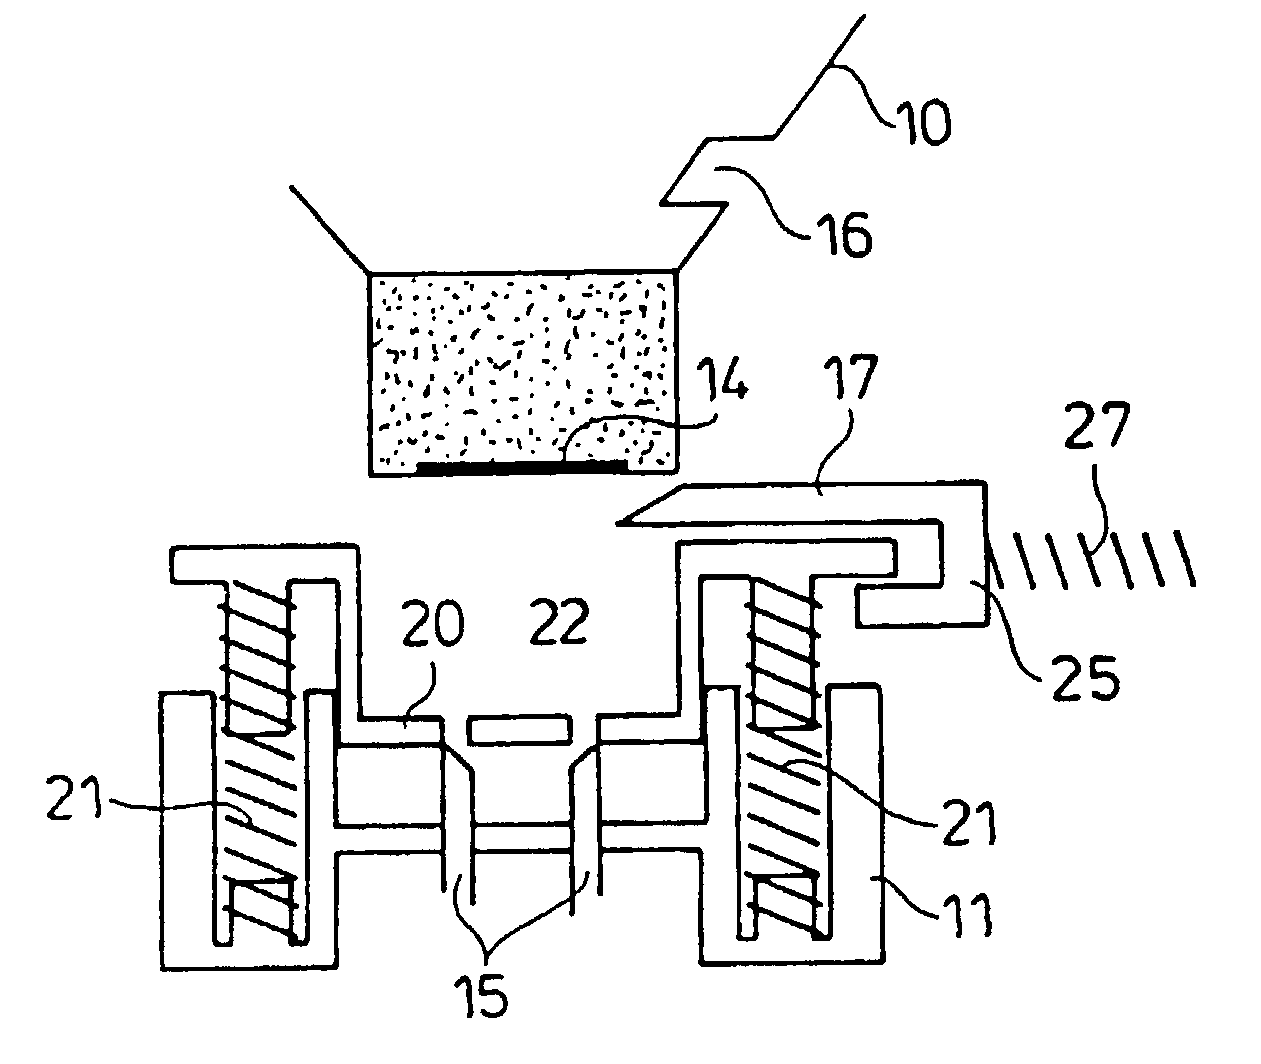 Reclosable fitment for connecting a reservoir to a dispensing appliance